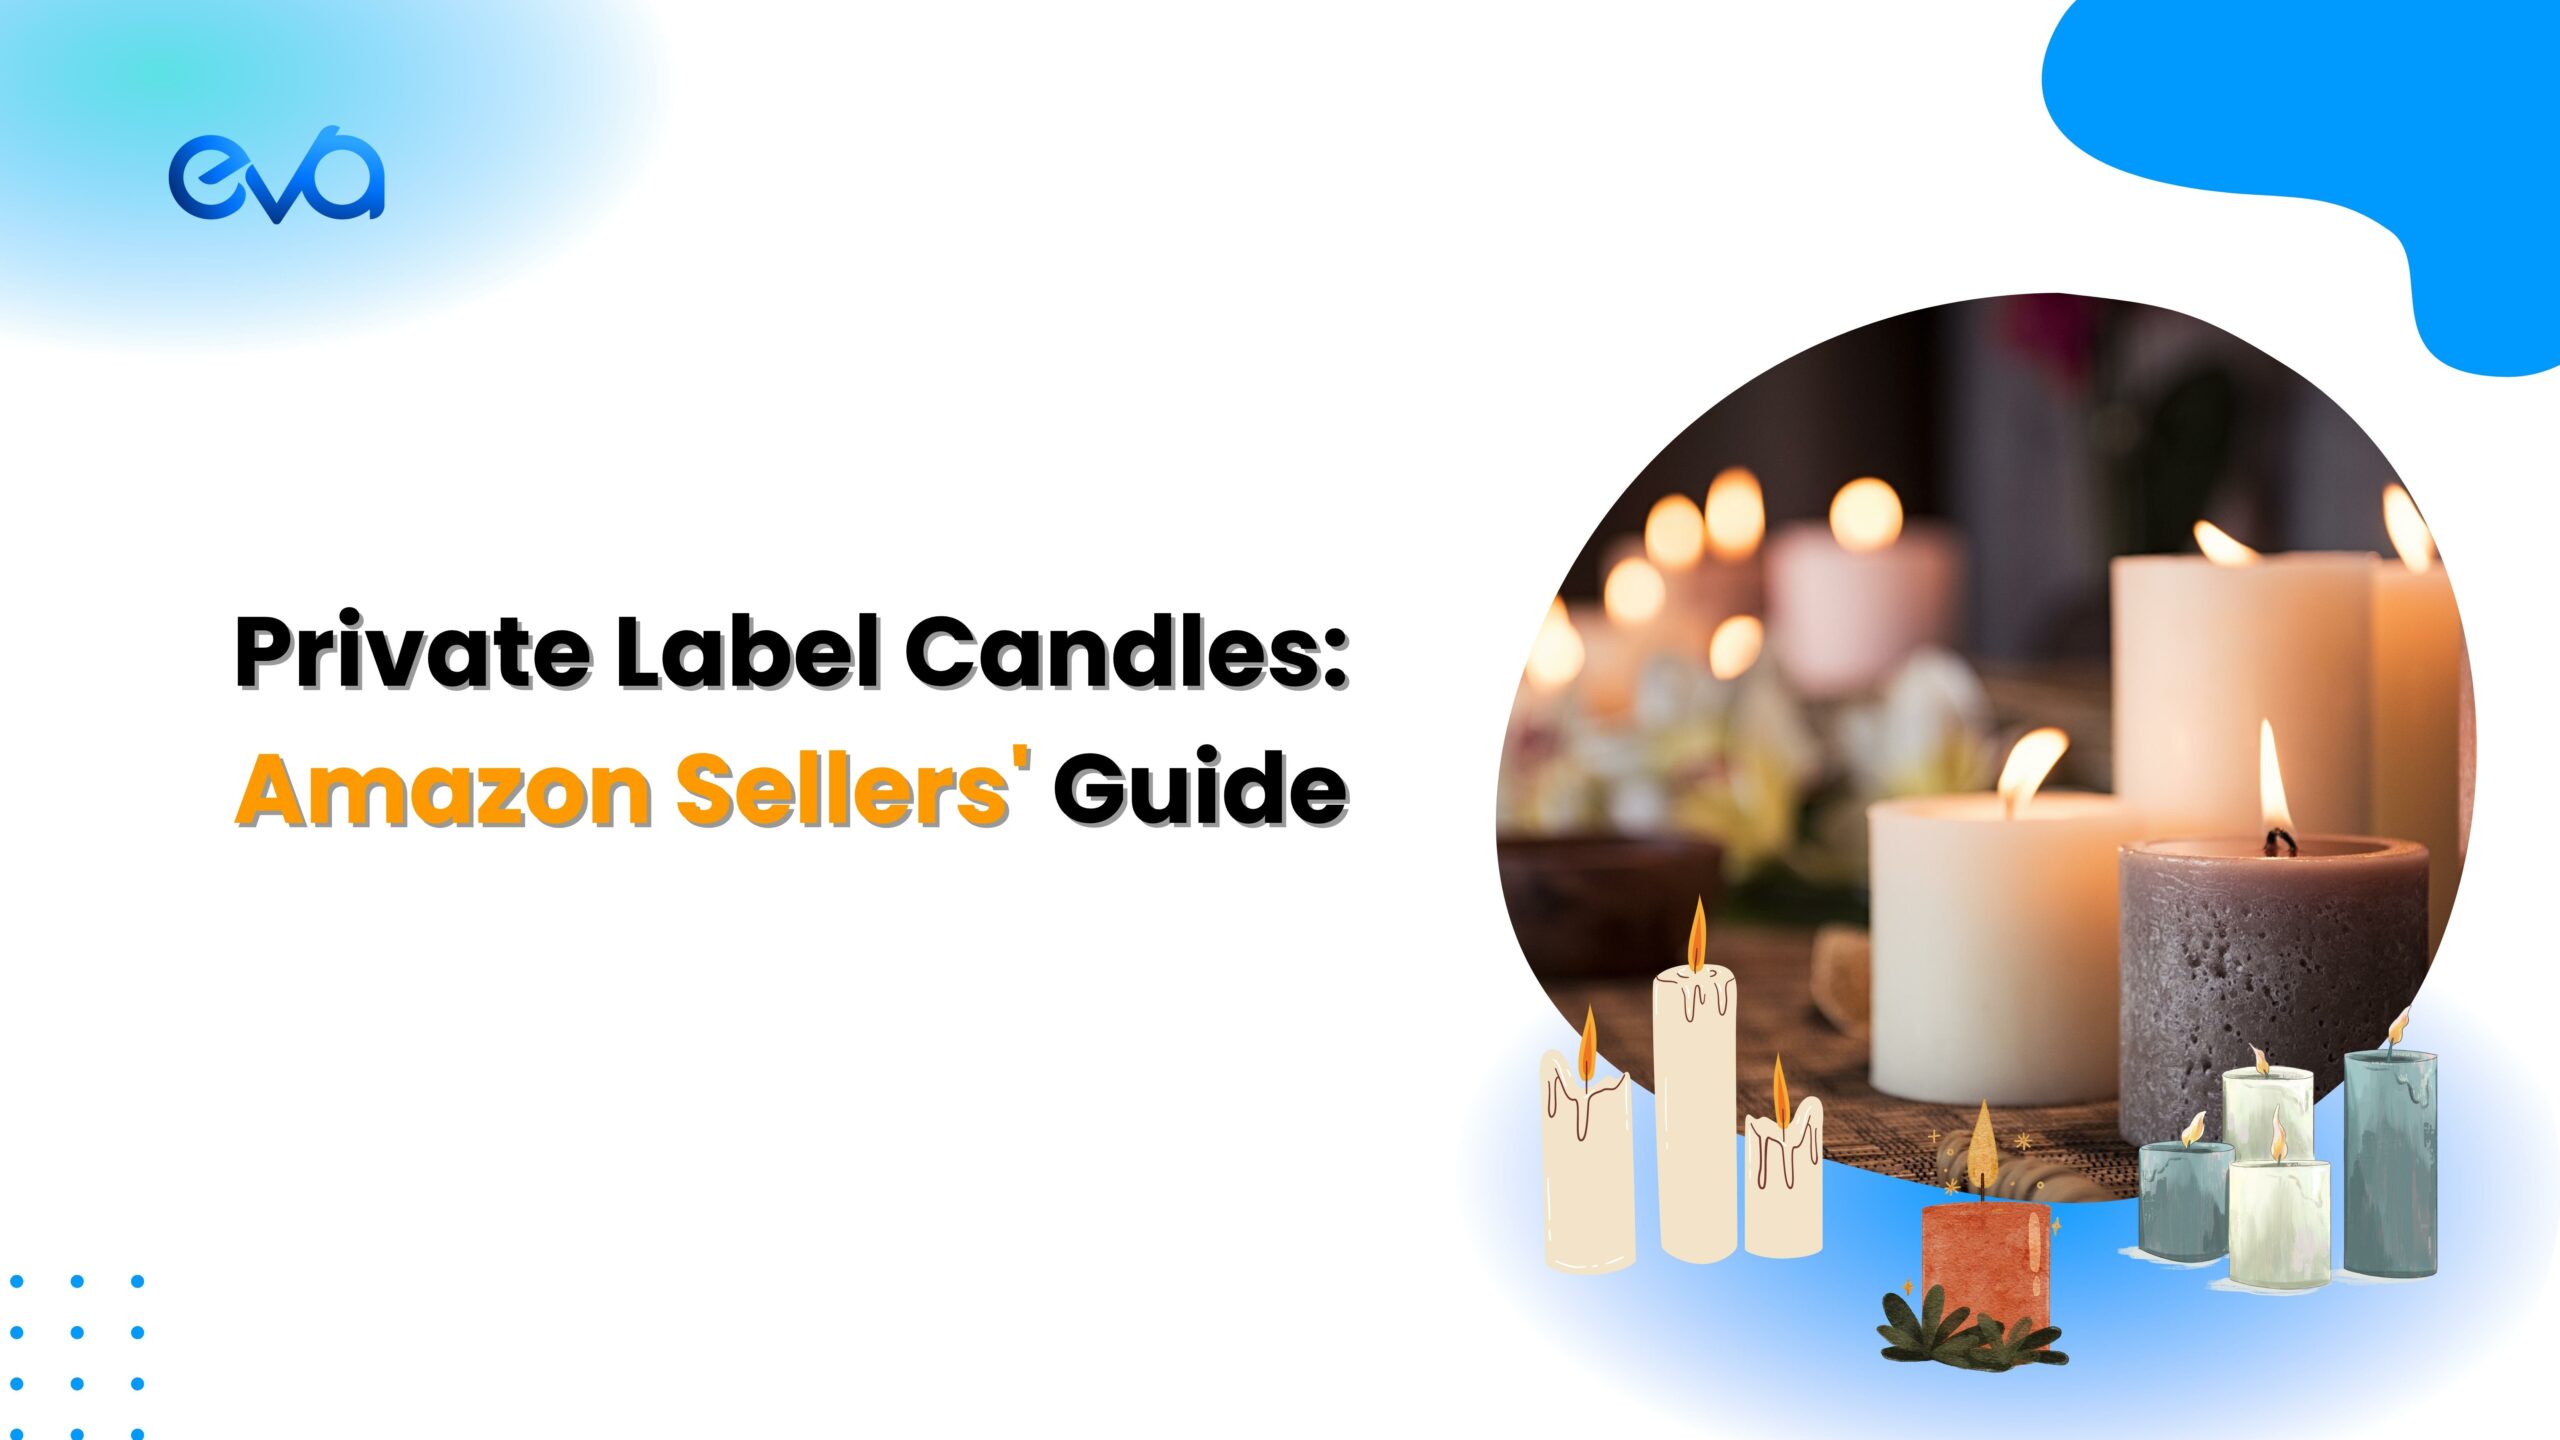 Candle Making Supplies  TALL NARROW GLASS CANDLE VESSEL (RELIGIOUS) -  Candle Making Supplies